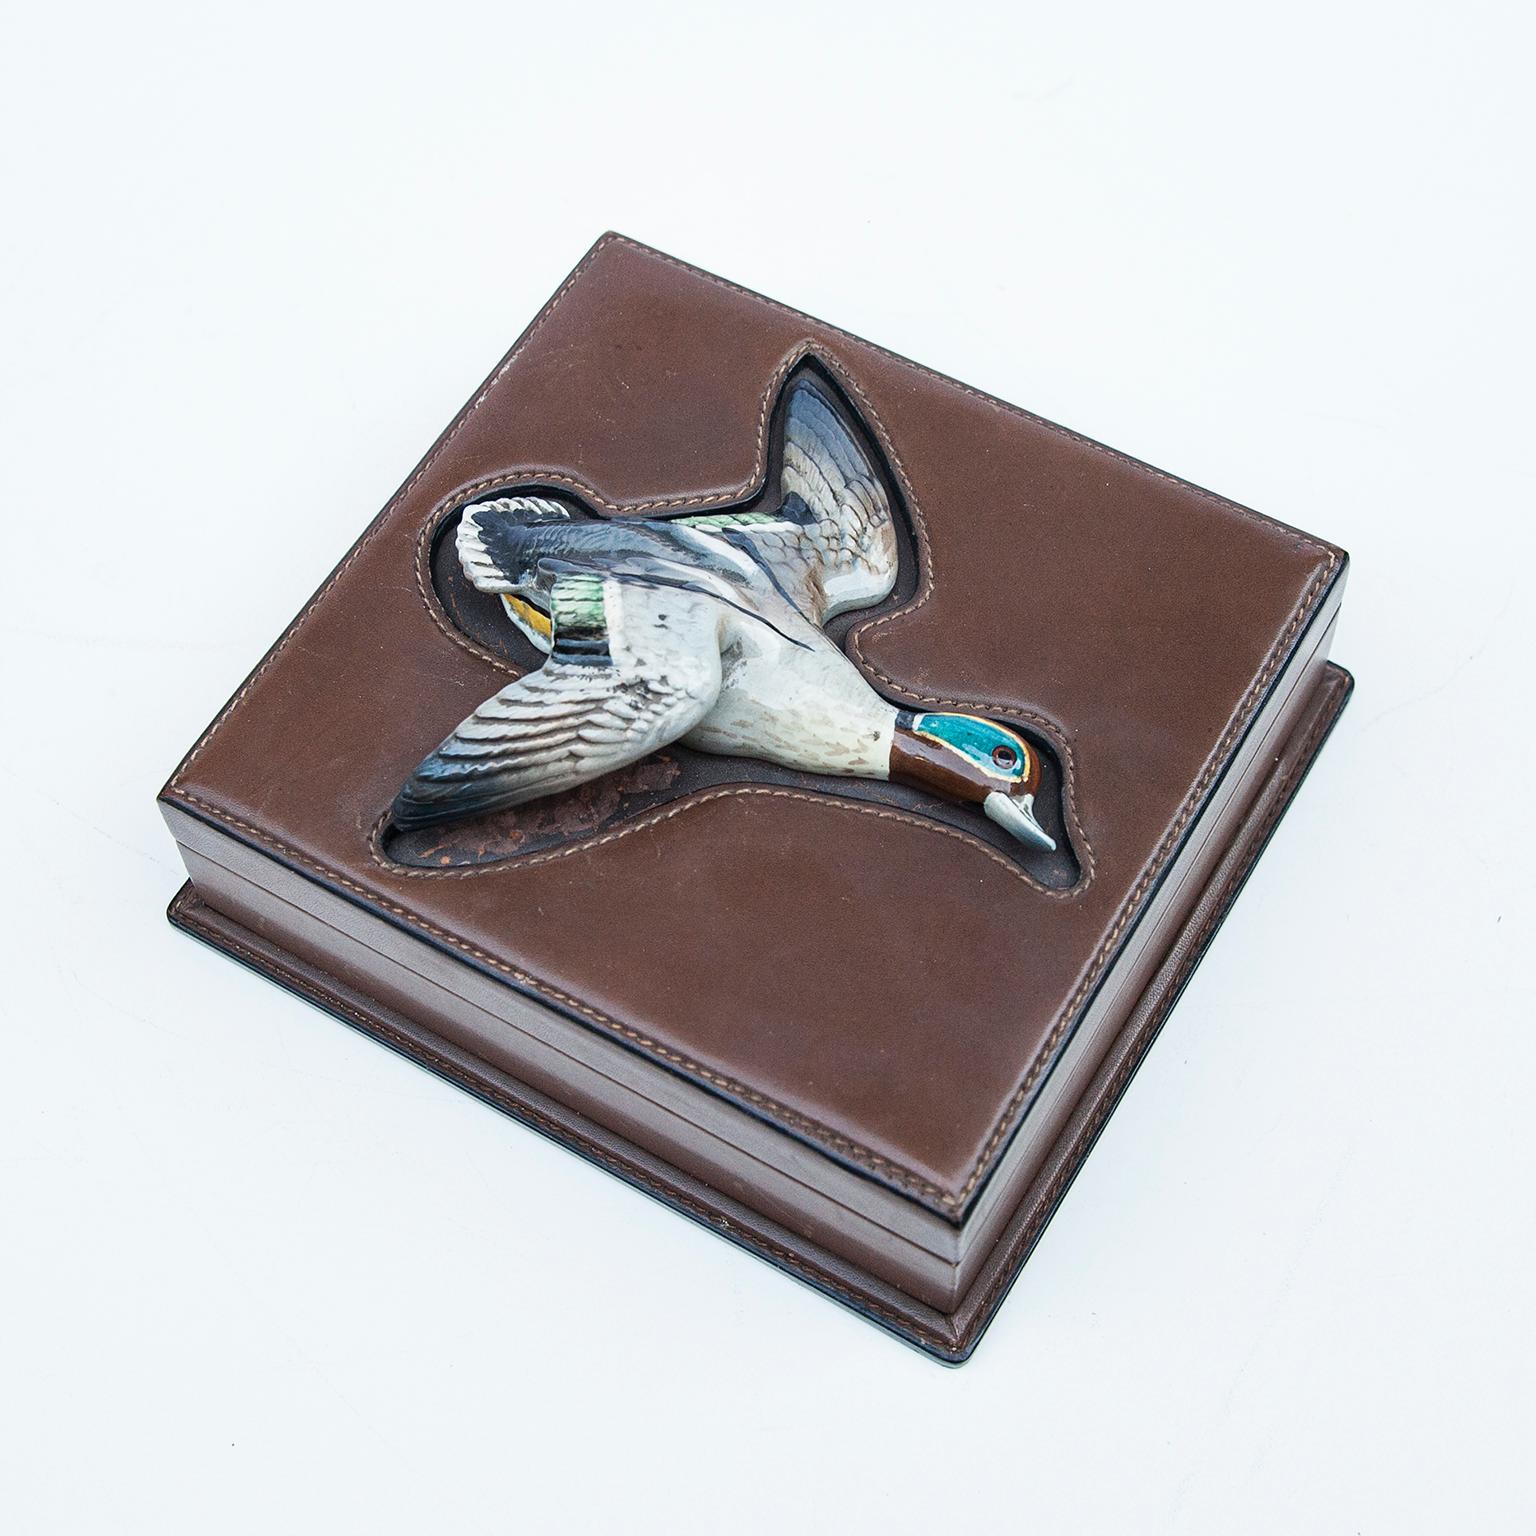 Gucci vintage brown leather box with porcelain wild duck. The box has wood internally. Gucci embossed on the bottom.